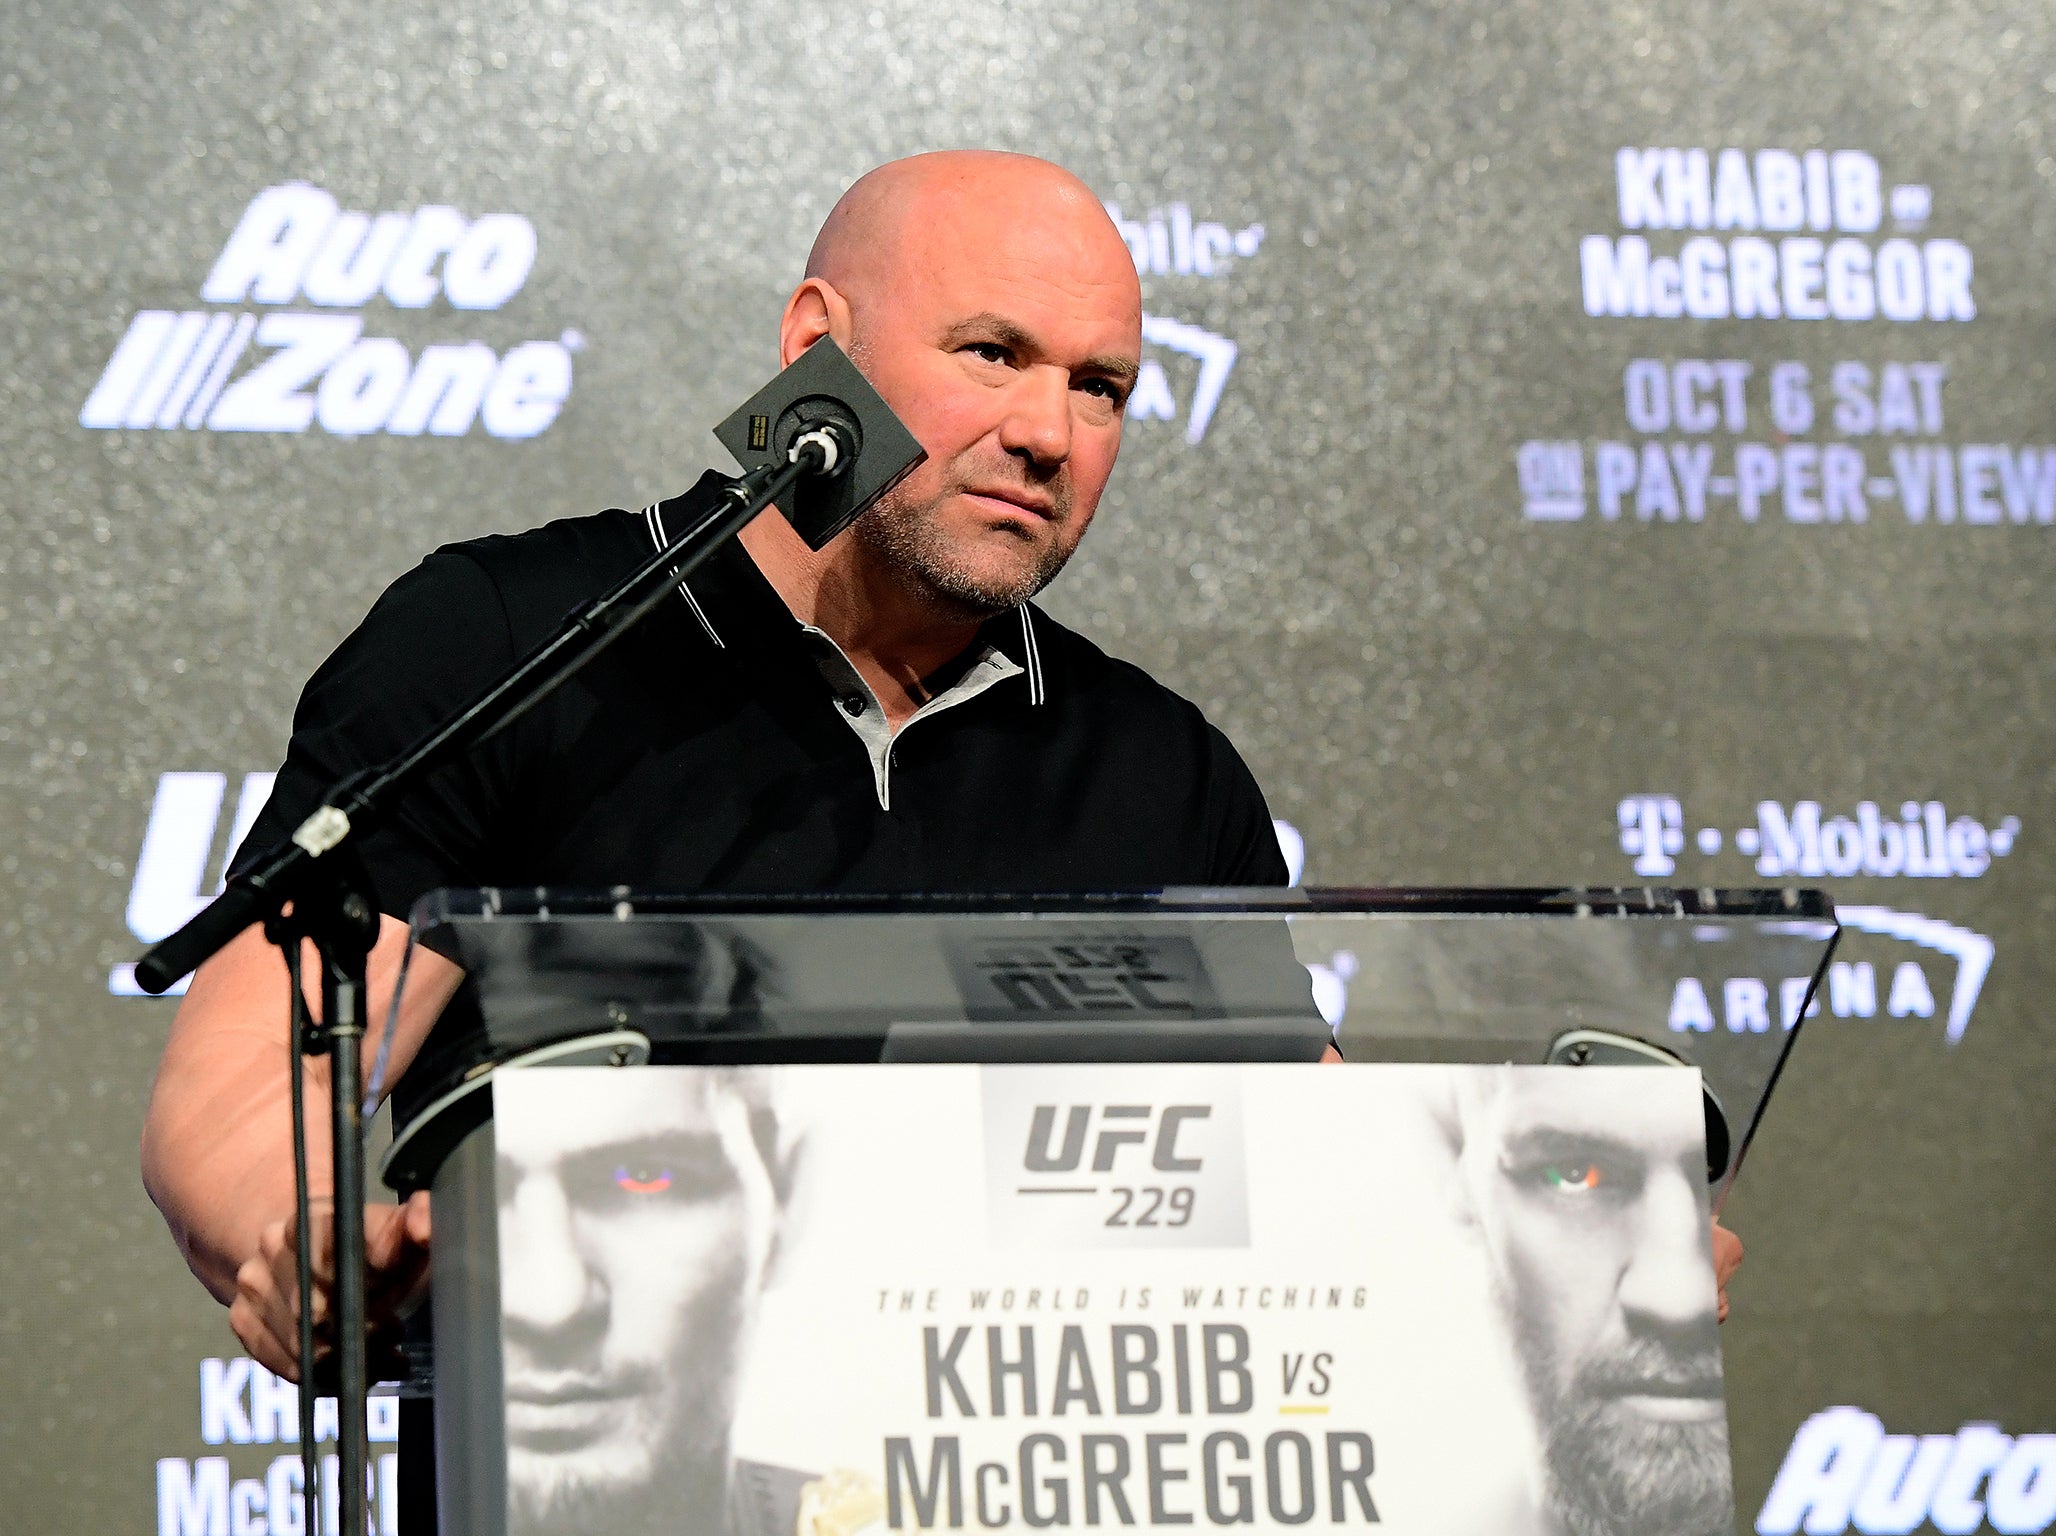 Dana White was furious with Khabib's action